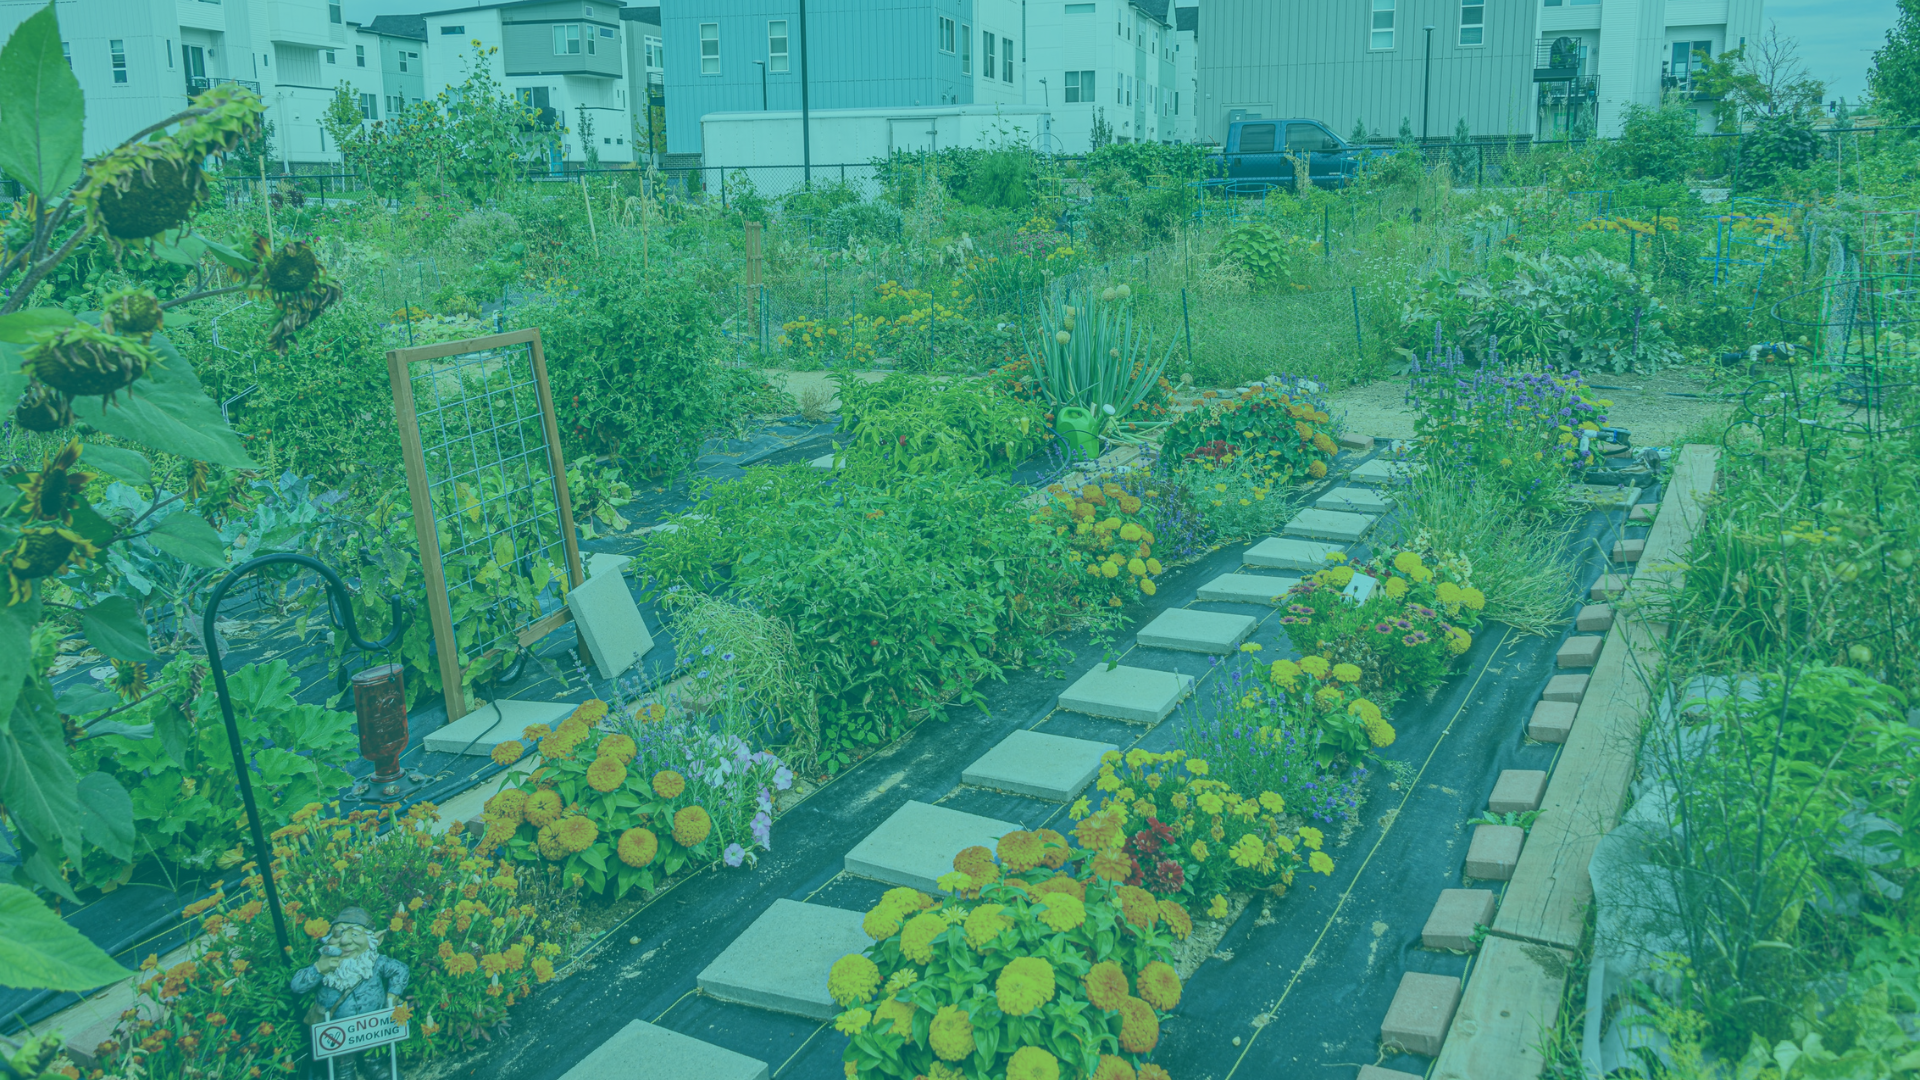 Image of a community garden with a blue filter over it